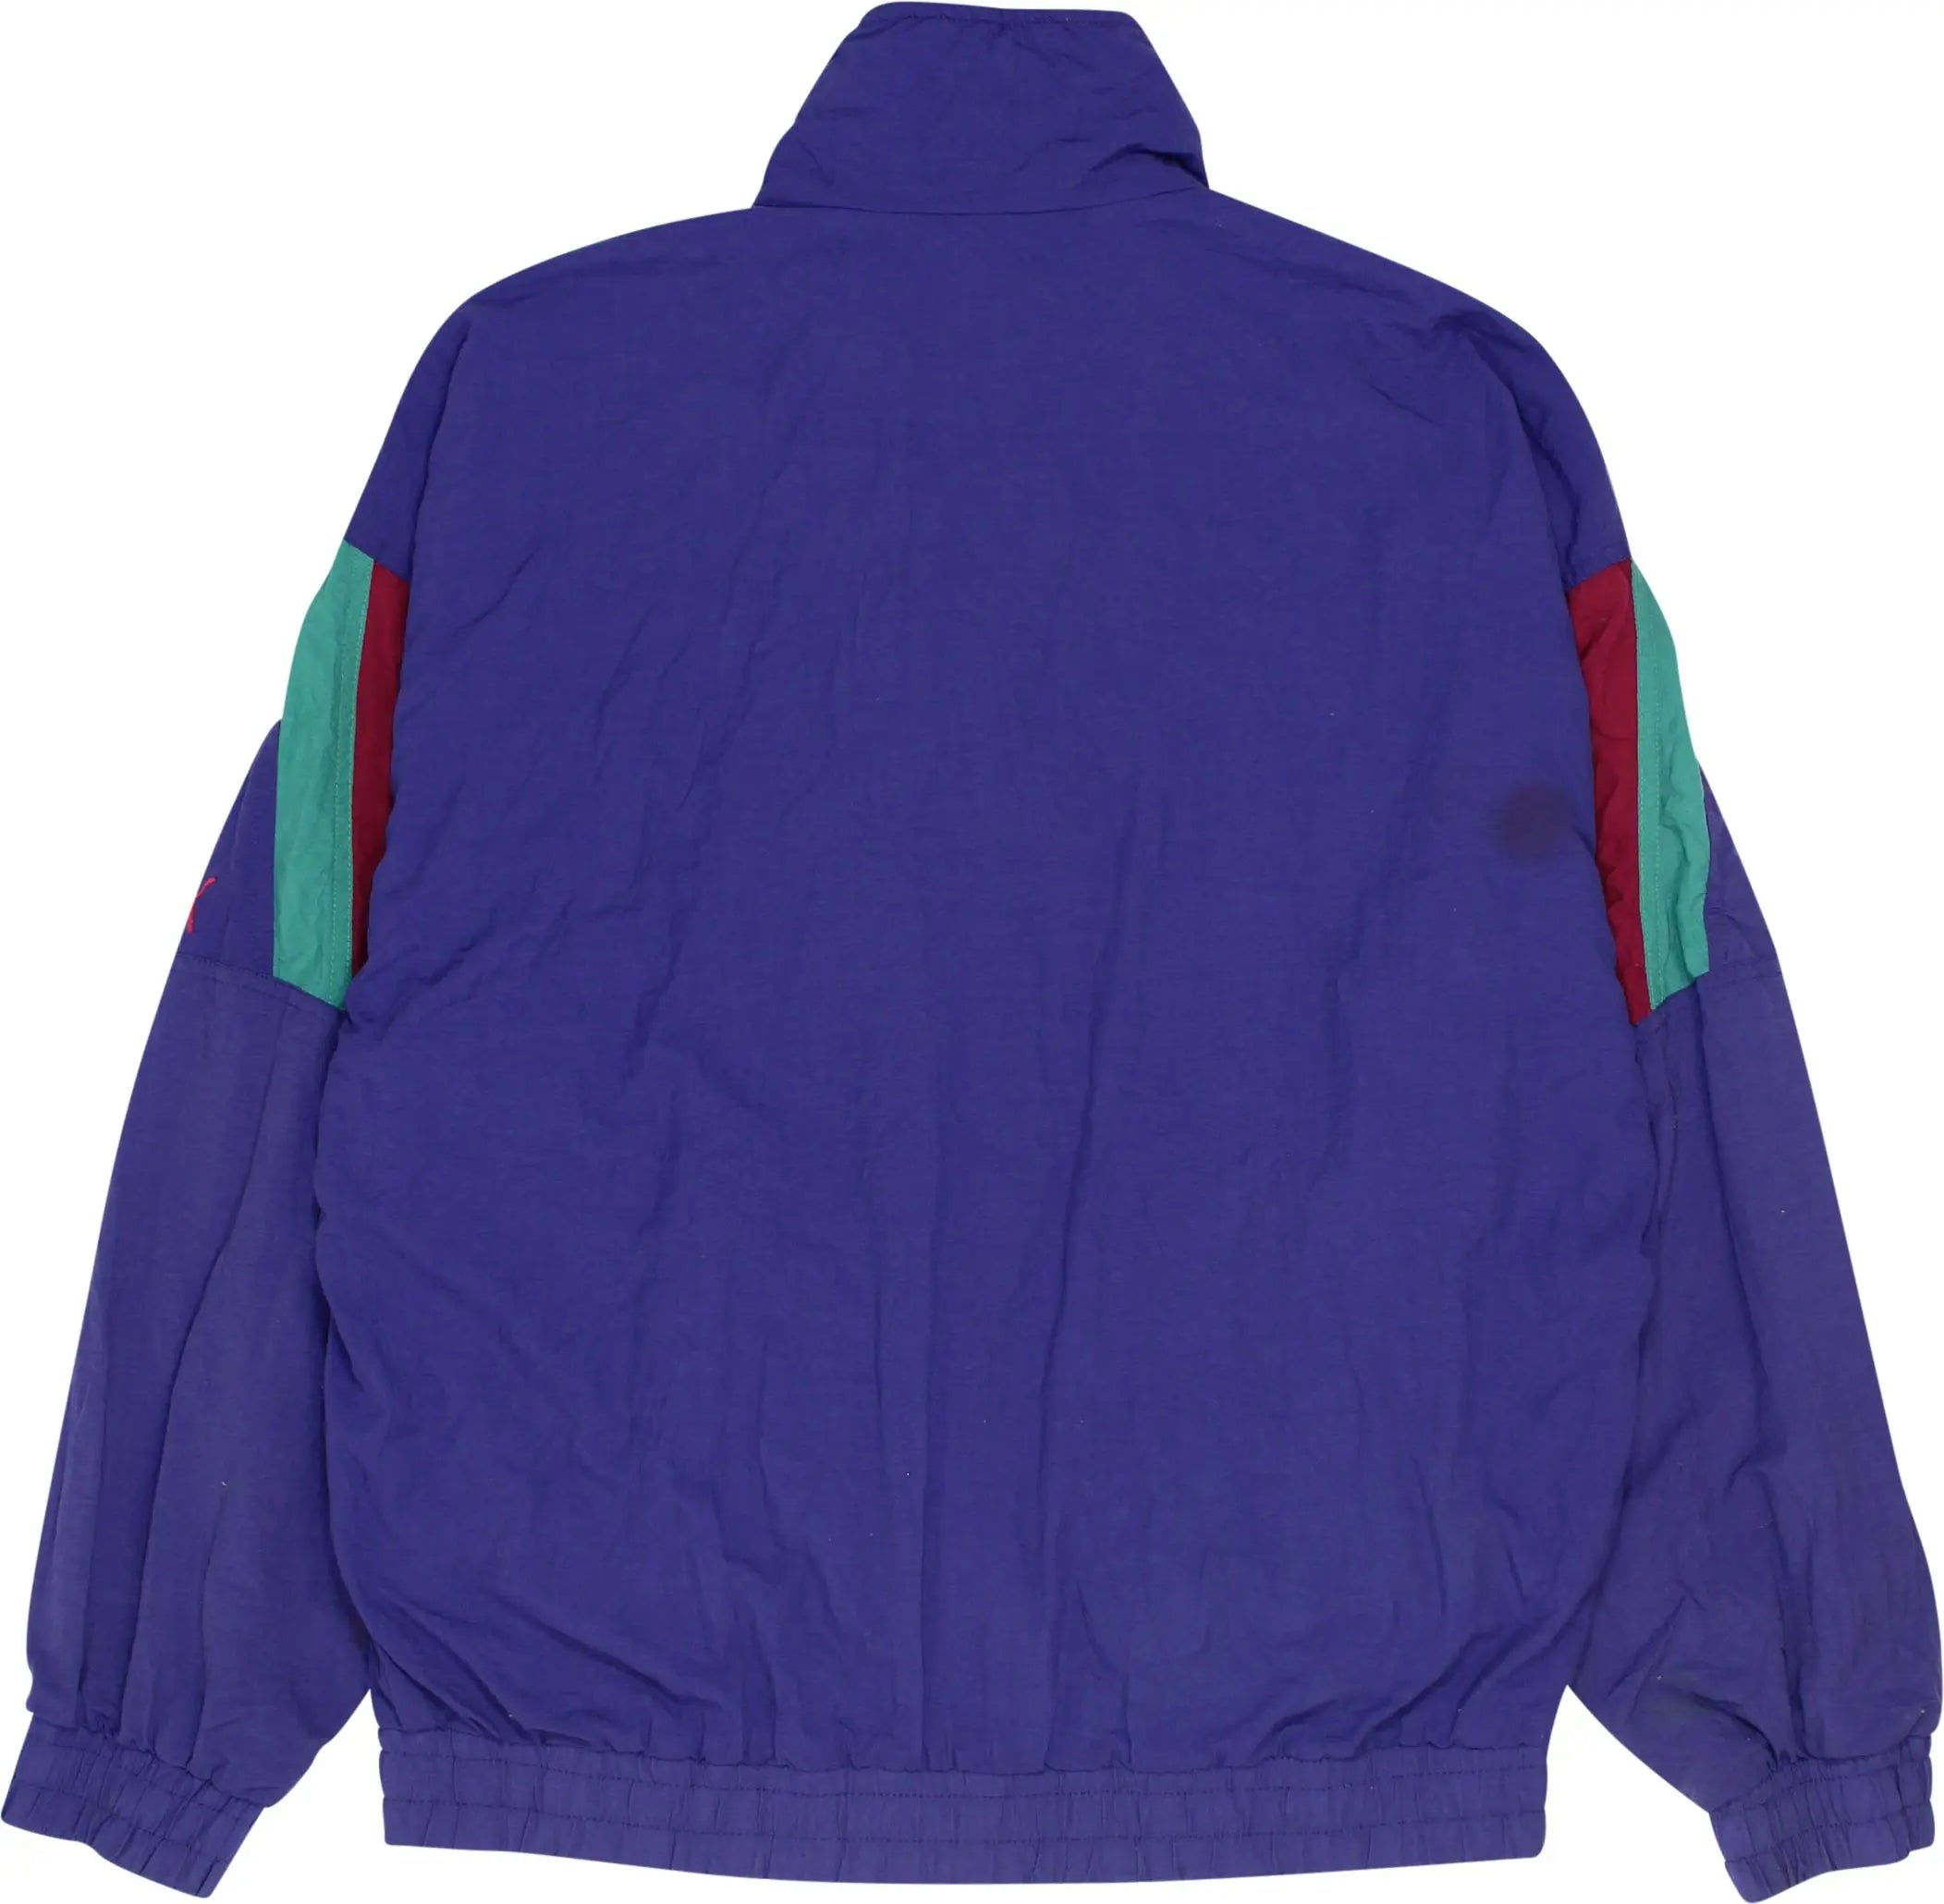 Puma - 80/90s Windbreaker by Puma- ThriftTale.com - Vintage and second handclothing